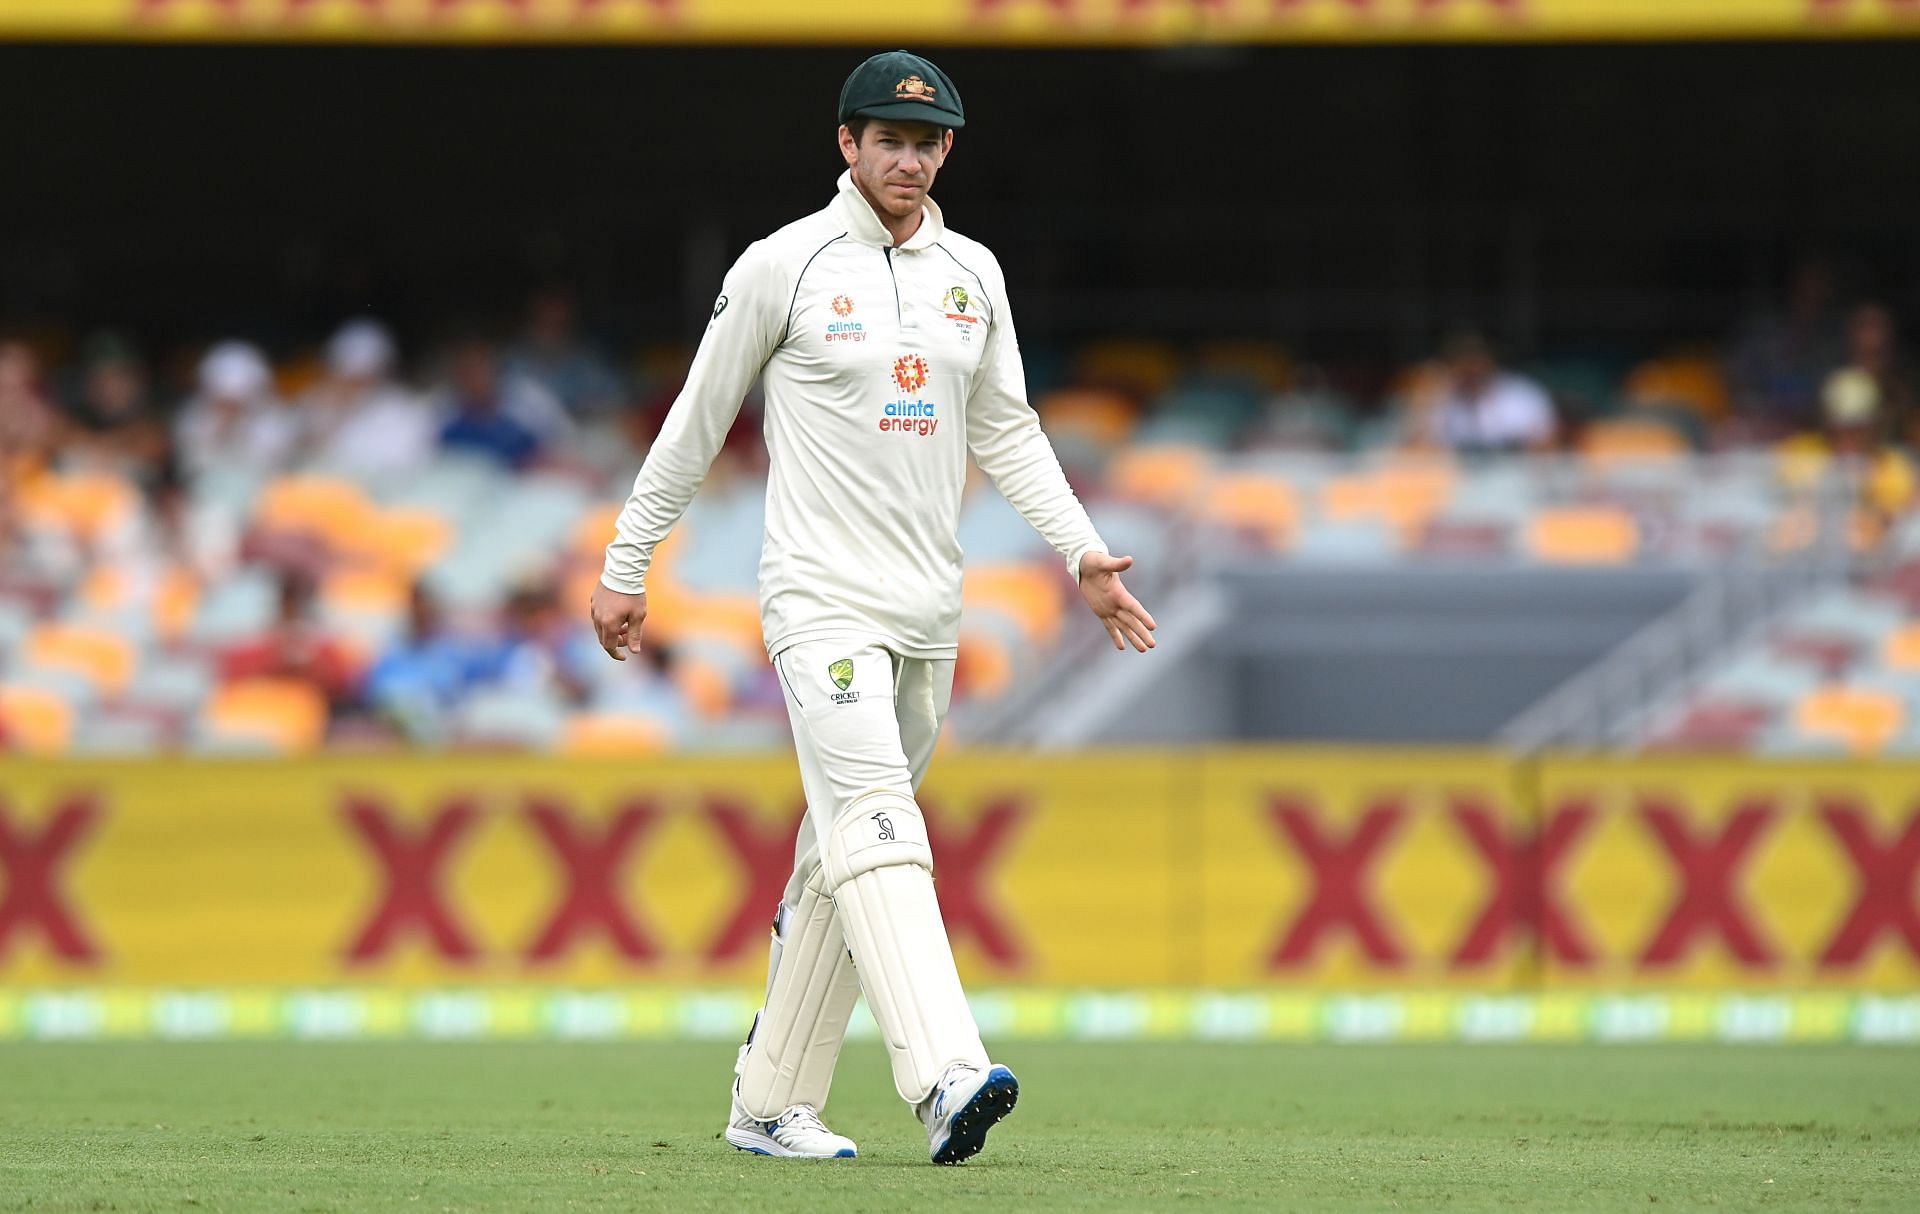 Tim Paine will not be available for the foreseeable future